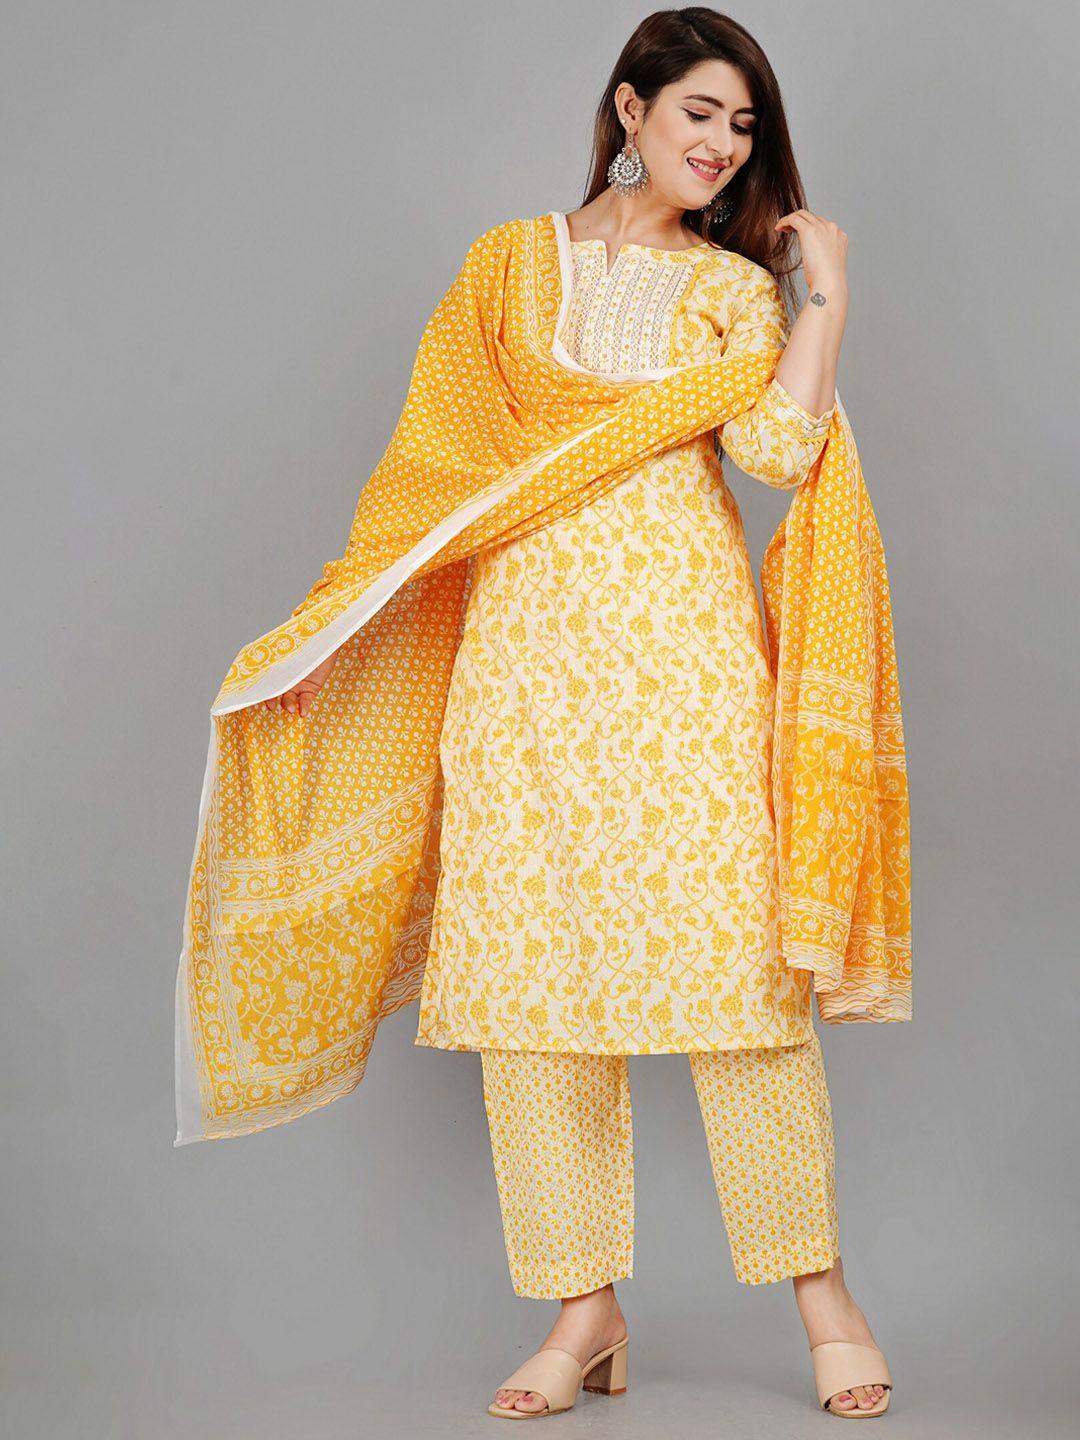 etnicawear women yellow printed pure cotton kurti with palazzos & with dupatta